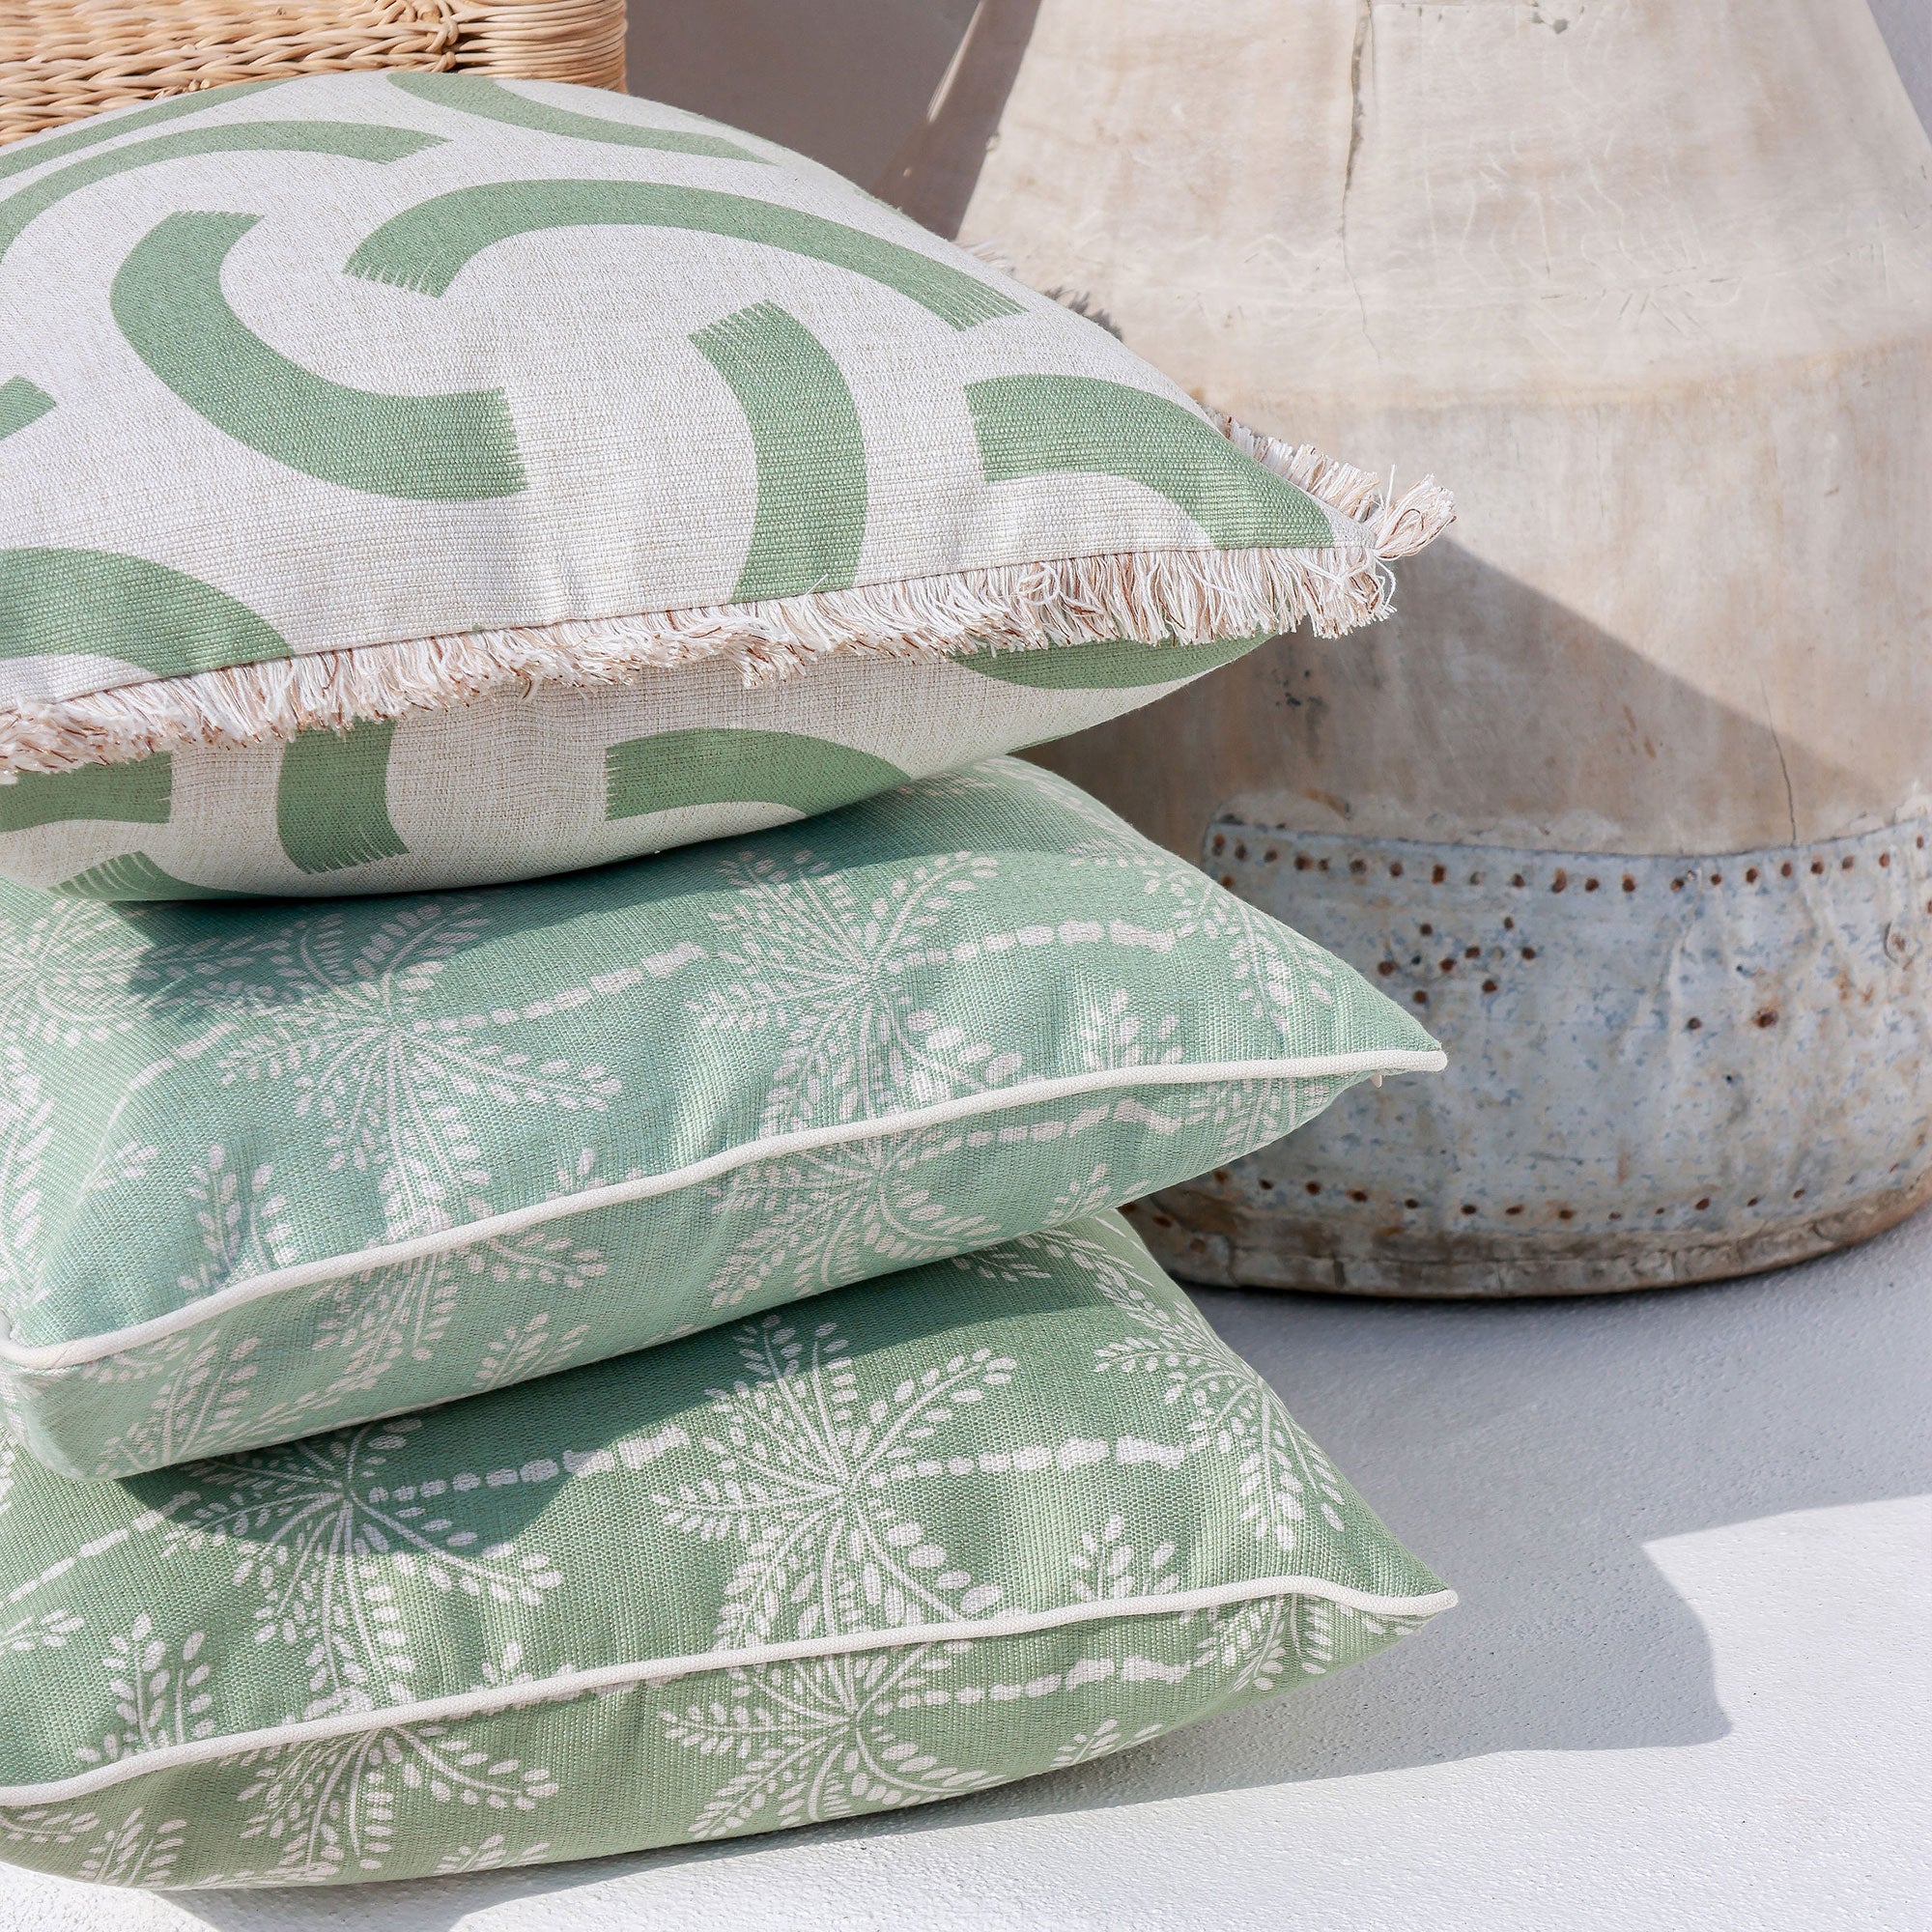 Cushion Cover-With Piping-Cabana Palms Sage-35cm x 50cm